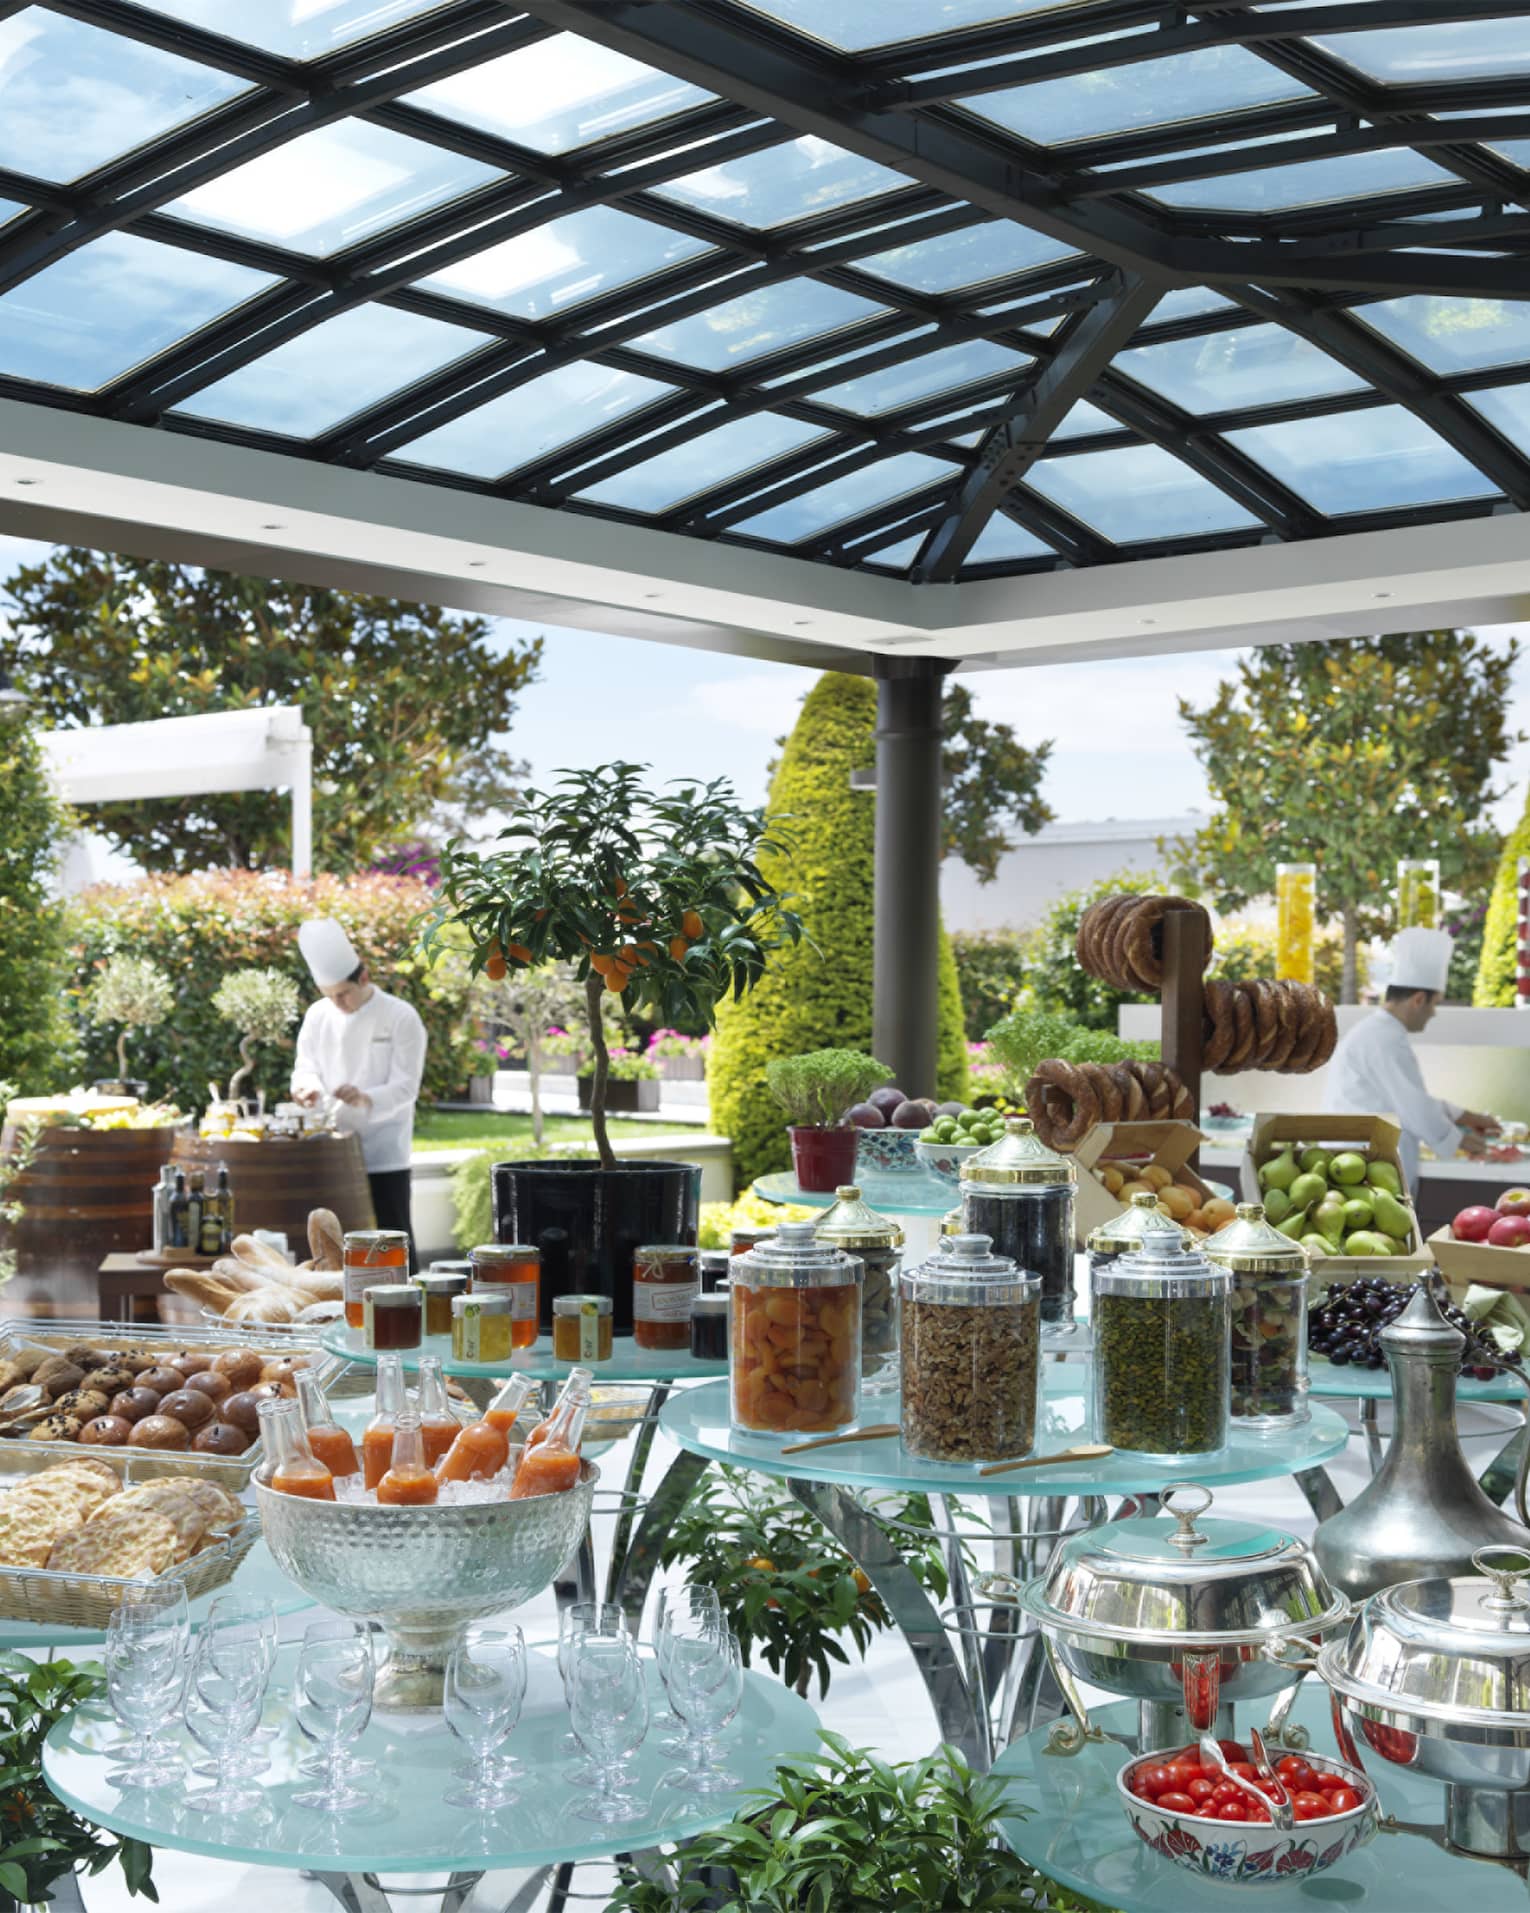 Brunch buffet on glass display on outdoor patio, chefs in white uniforms